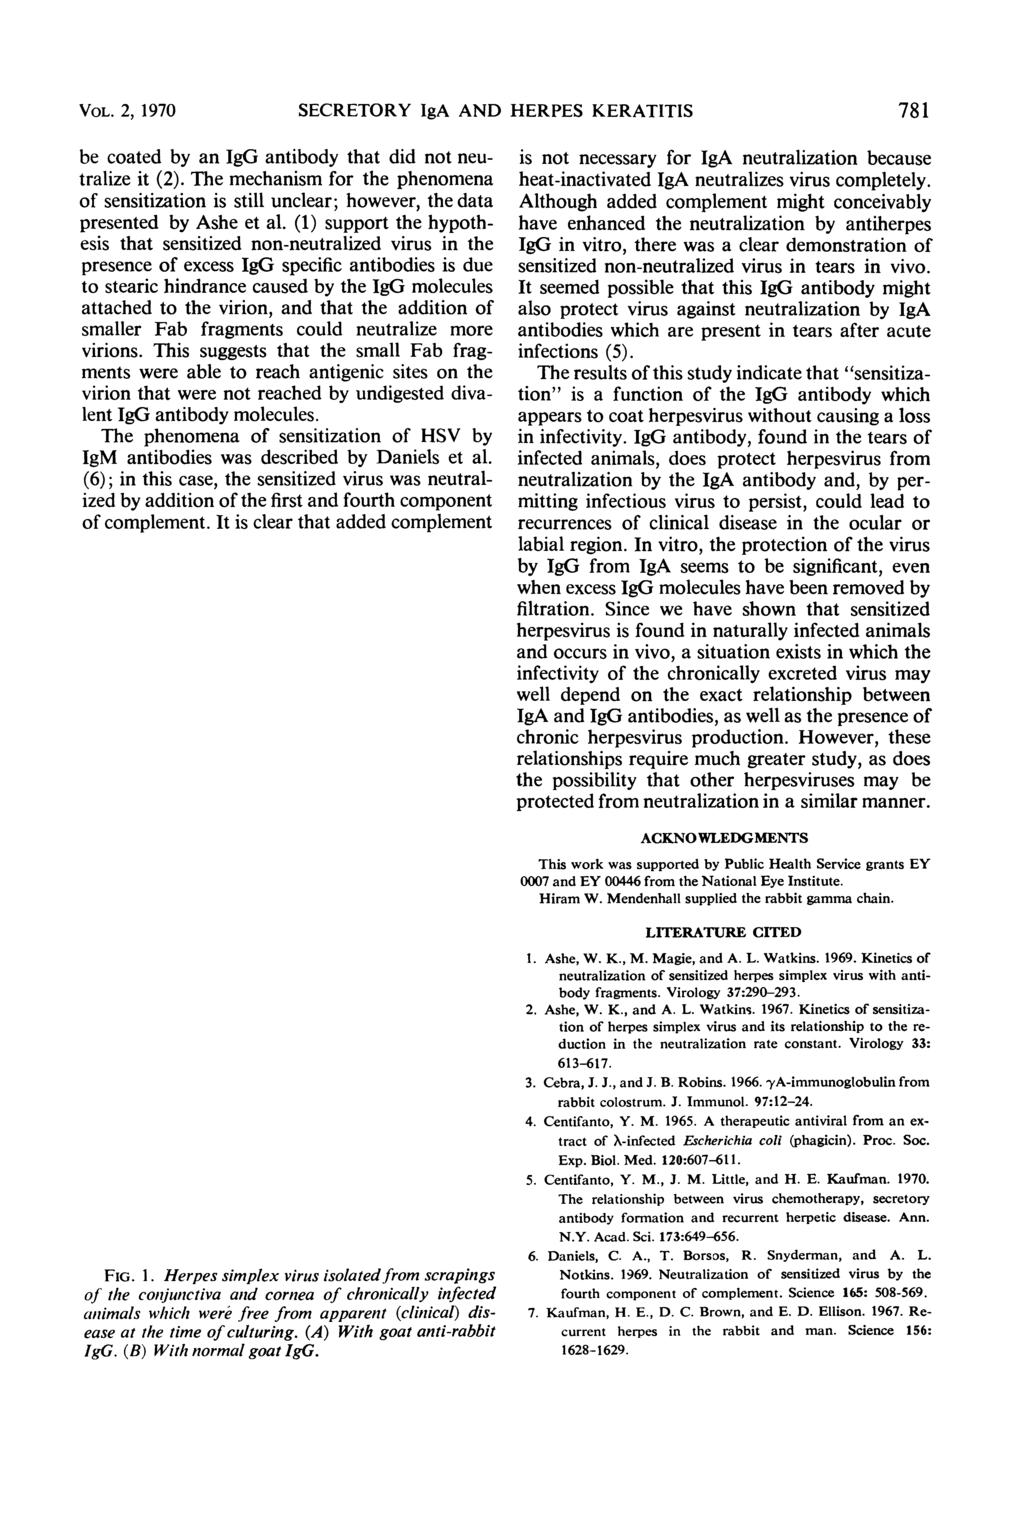 VOL. 2, 1970 SECRETORY IgA AND HERPES KERATITIS 781 be coated by an IgG antibody that did not neutralize it (2).